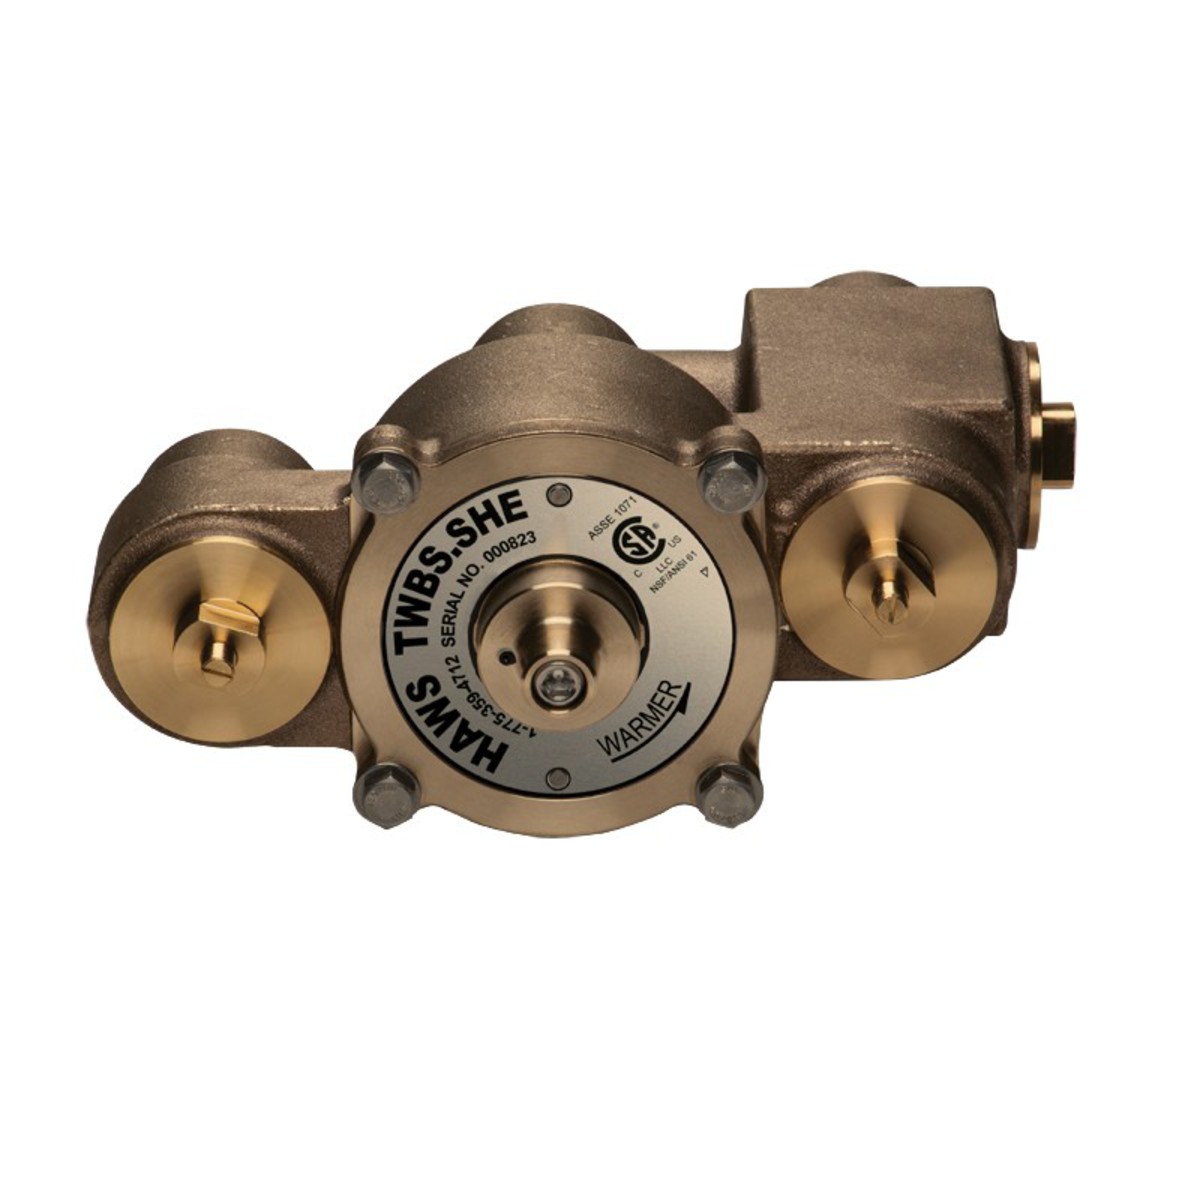 Haws® AXION® MSR Thermostatic Emergency Tempering Valve